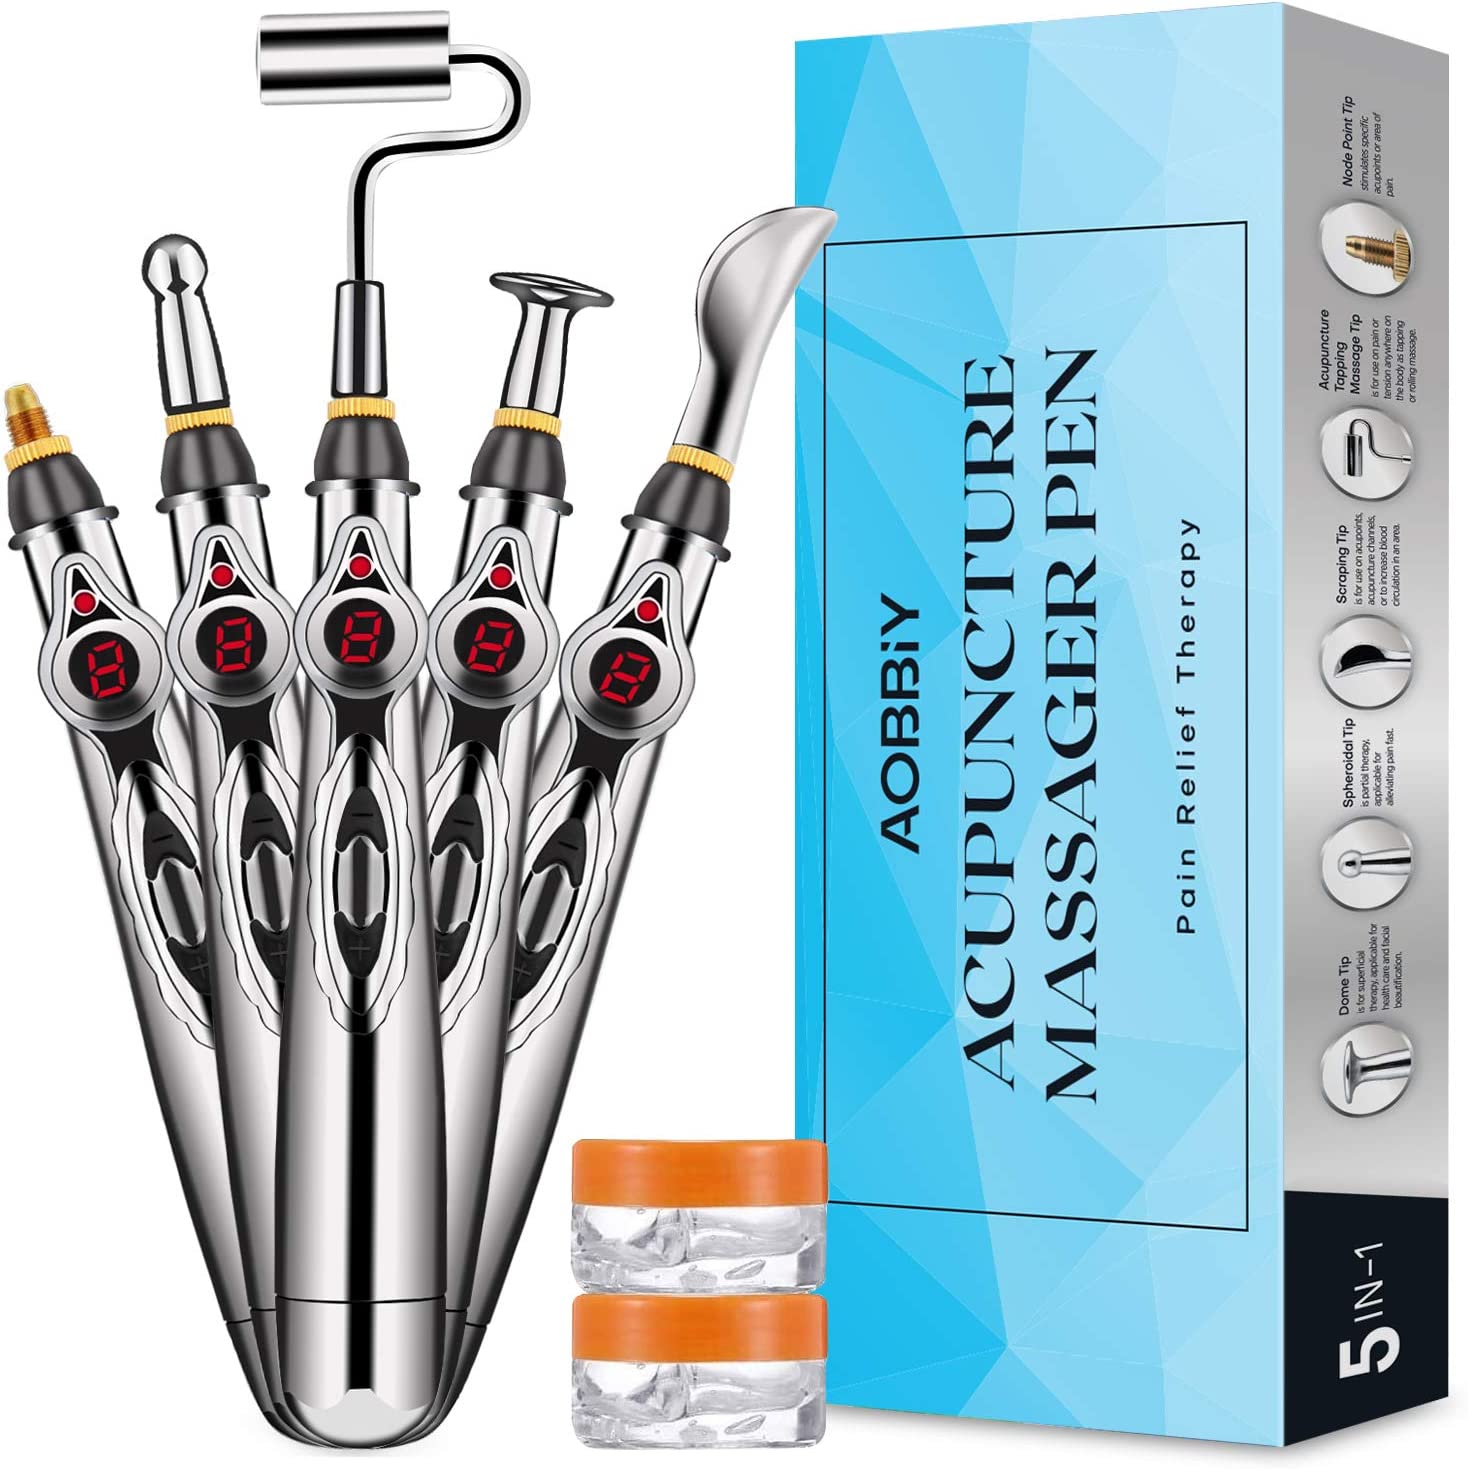  7. Aobbiy 5-in-1 Electronic Acupuncture Pen 